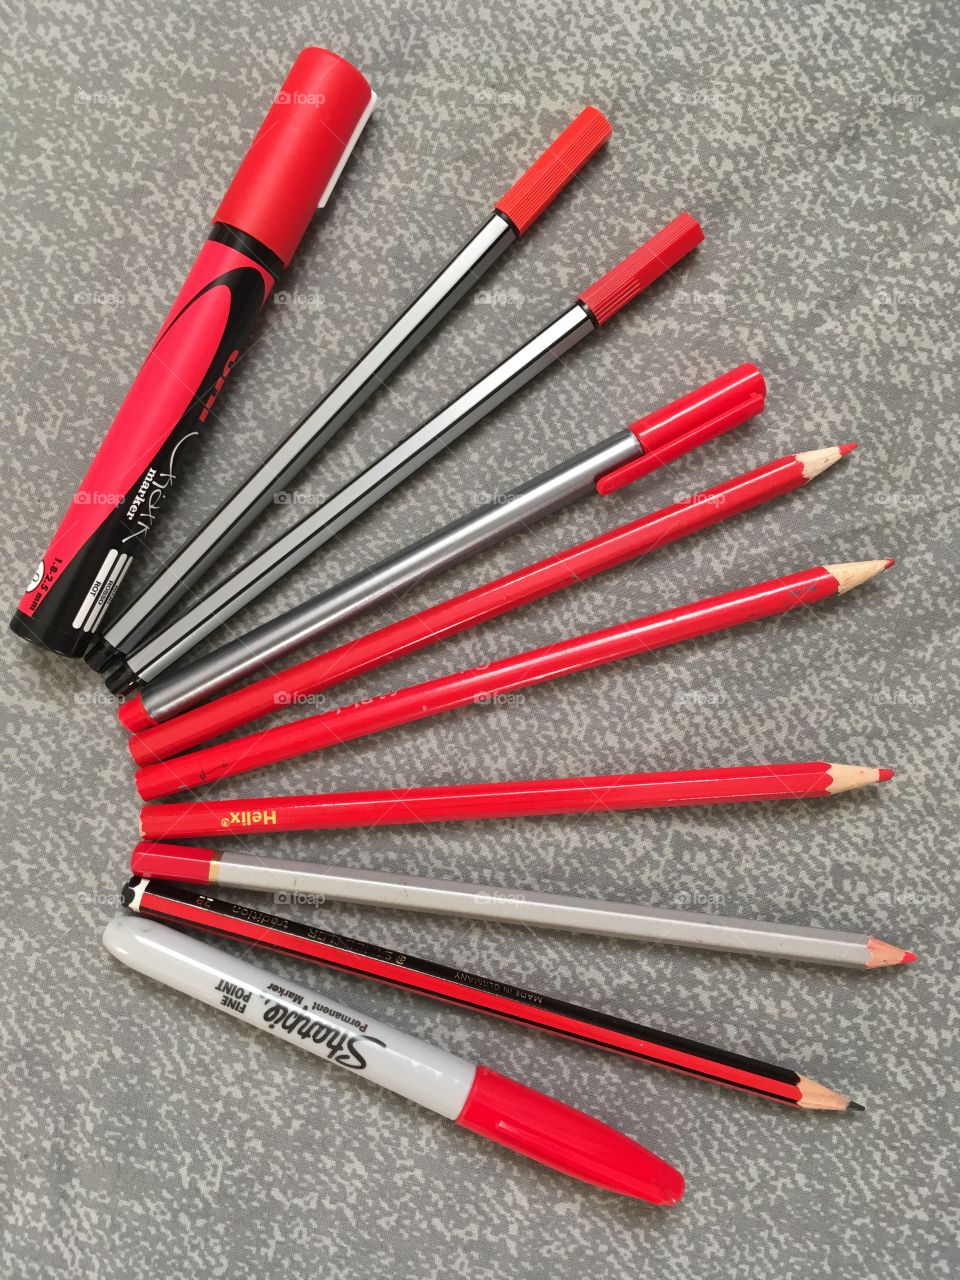 Red pencils and pens